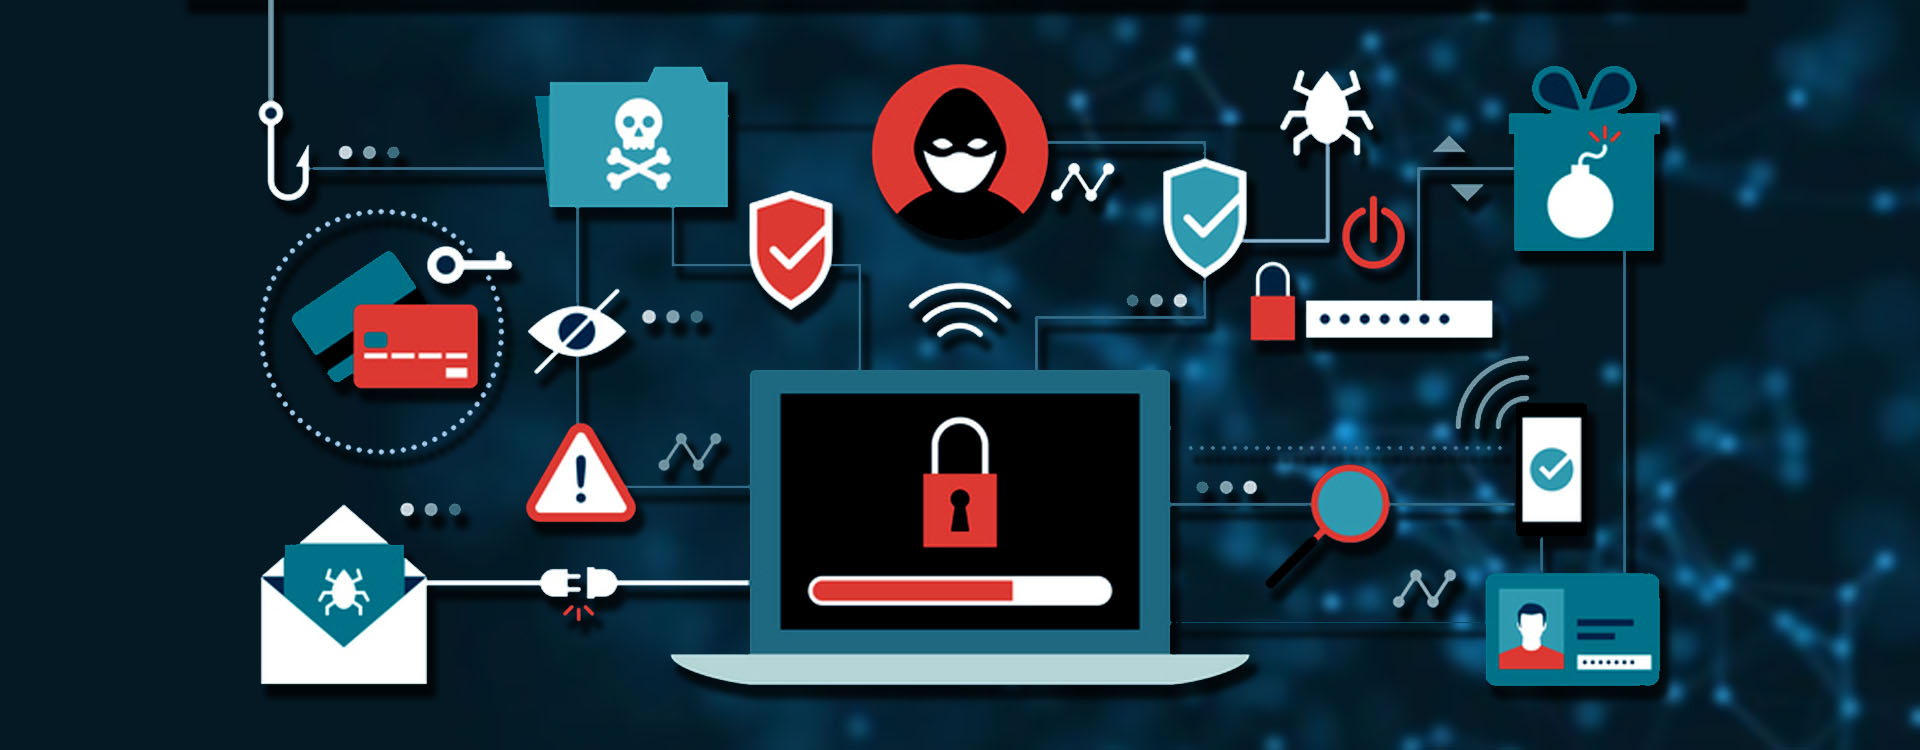 Startups and SMEs are vulnerable to cyberattacks: How to stay safe